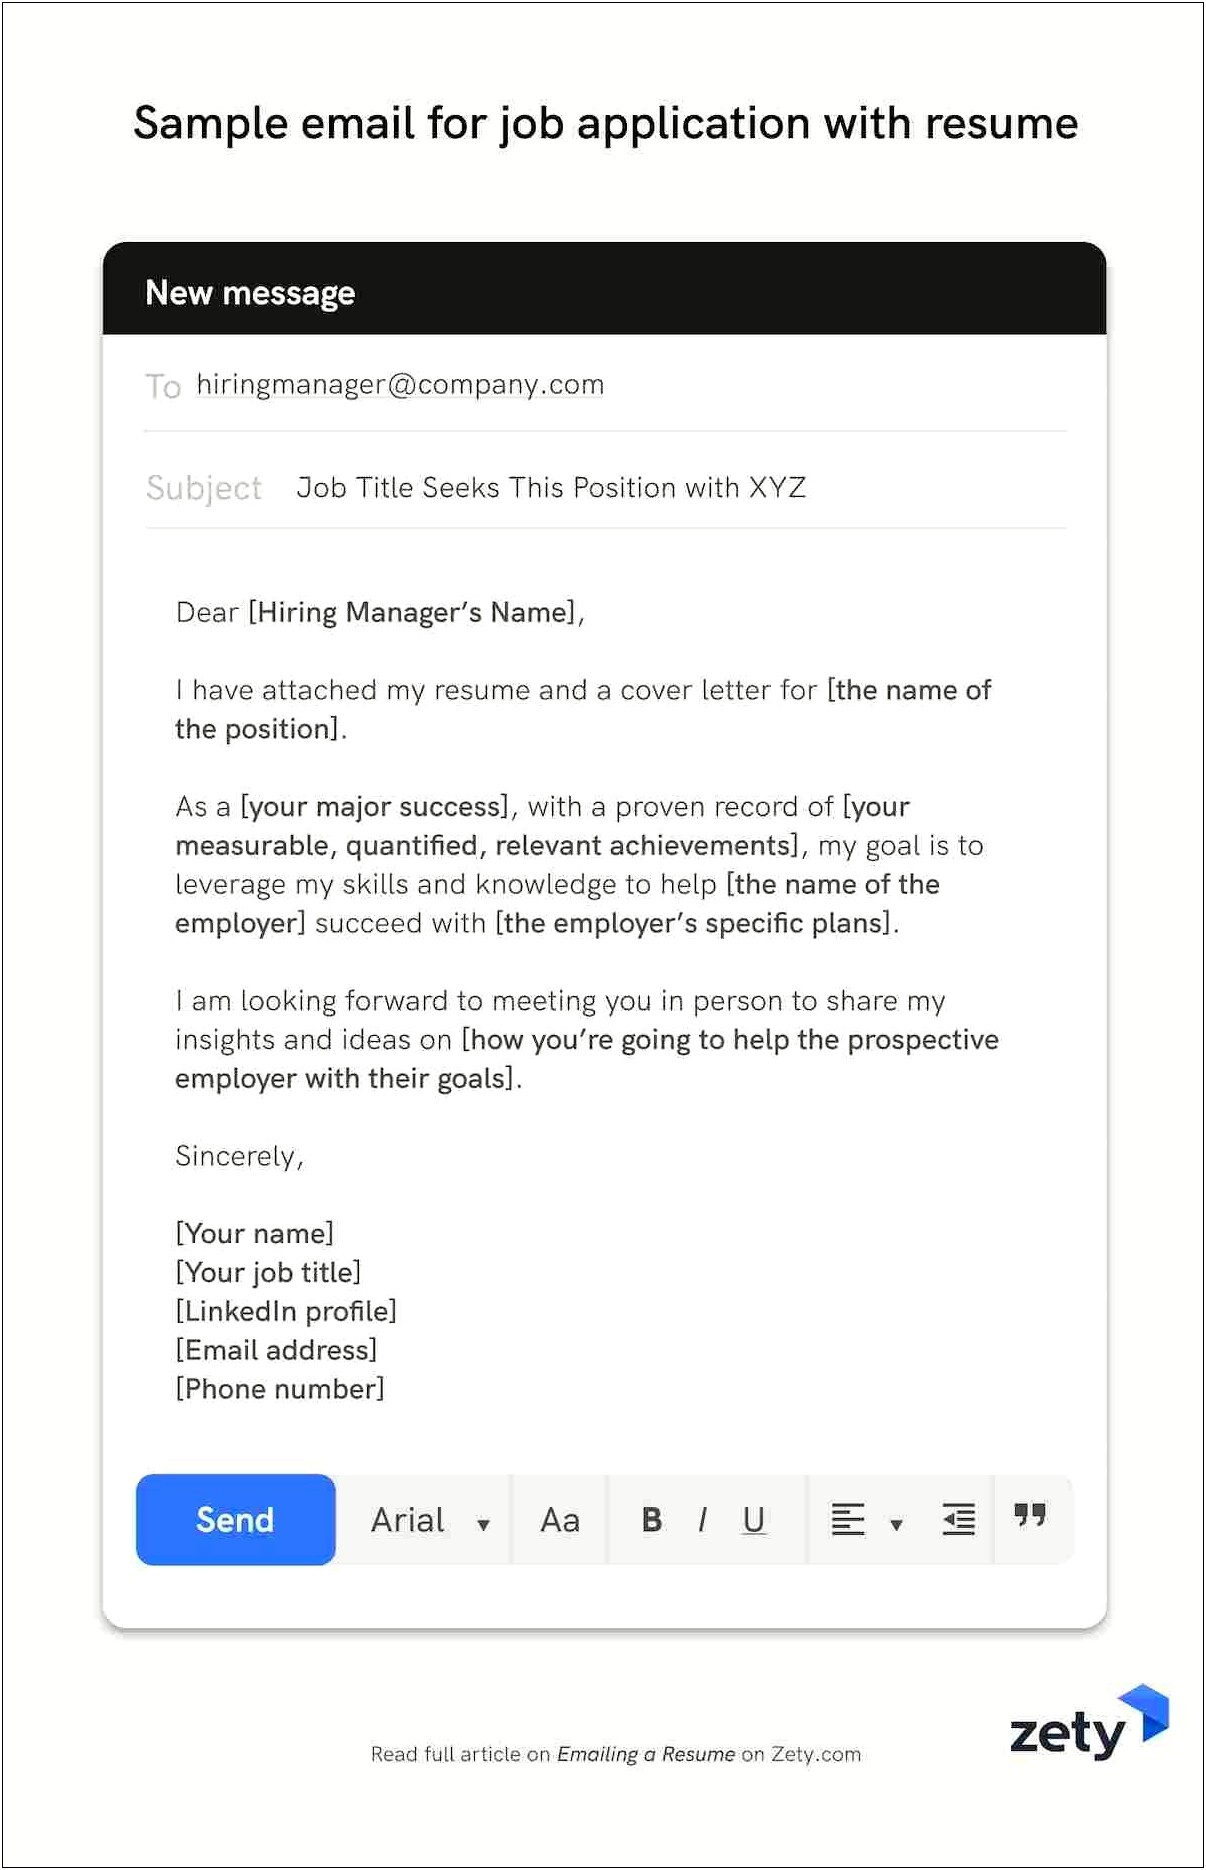 Emailing Cover Letter And Resume Subject Line